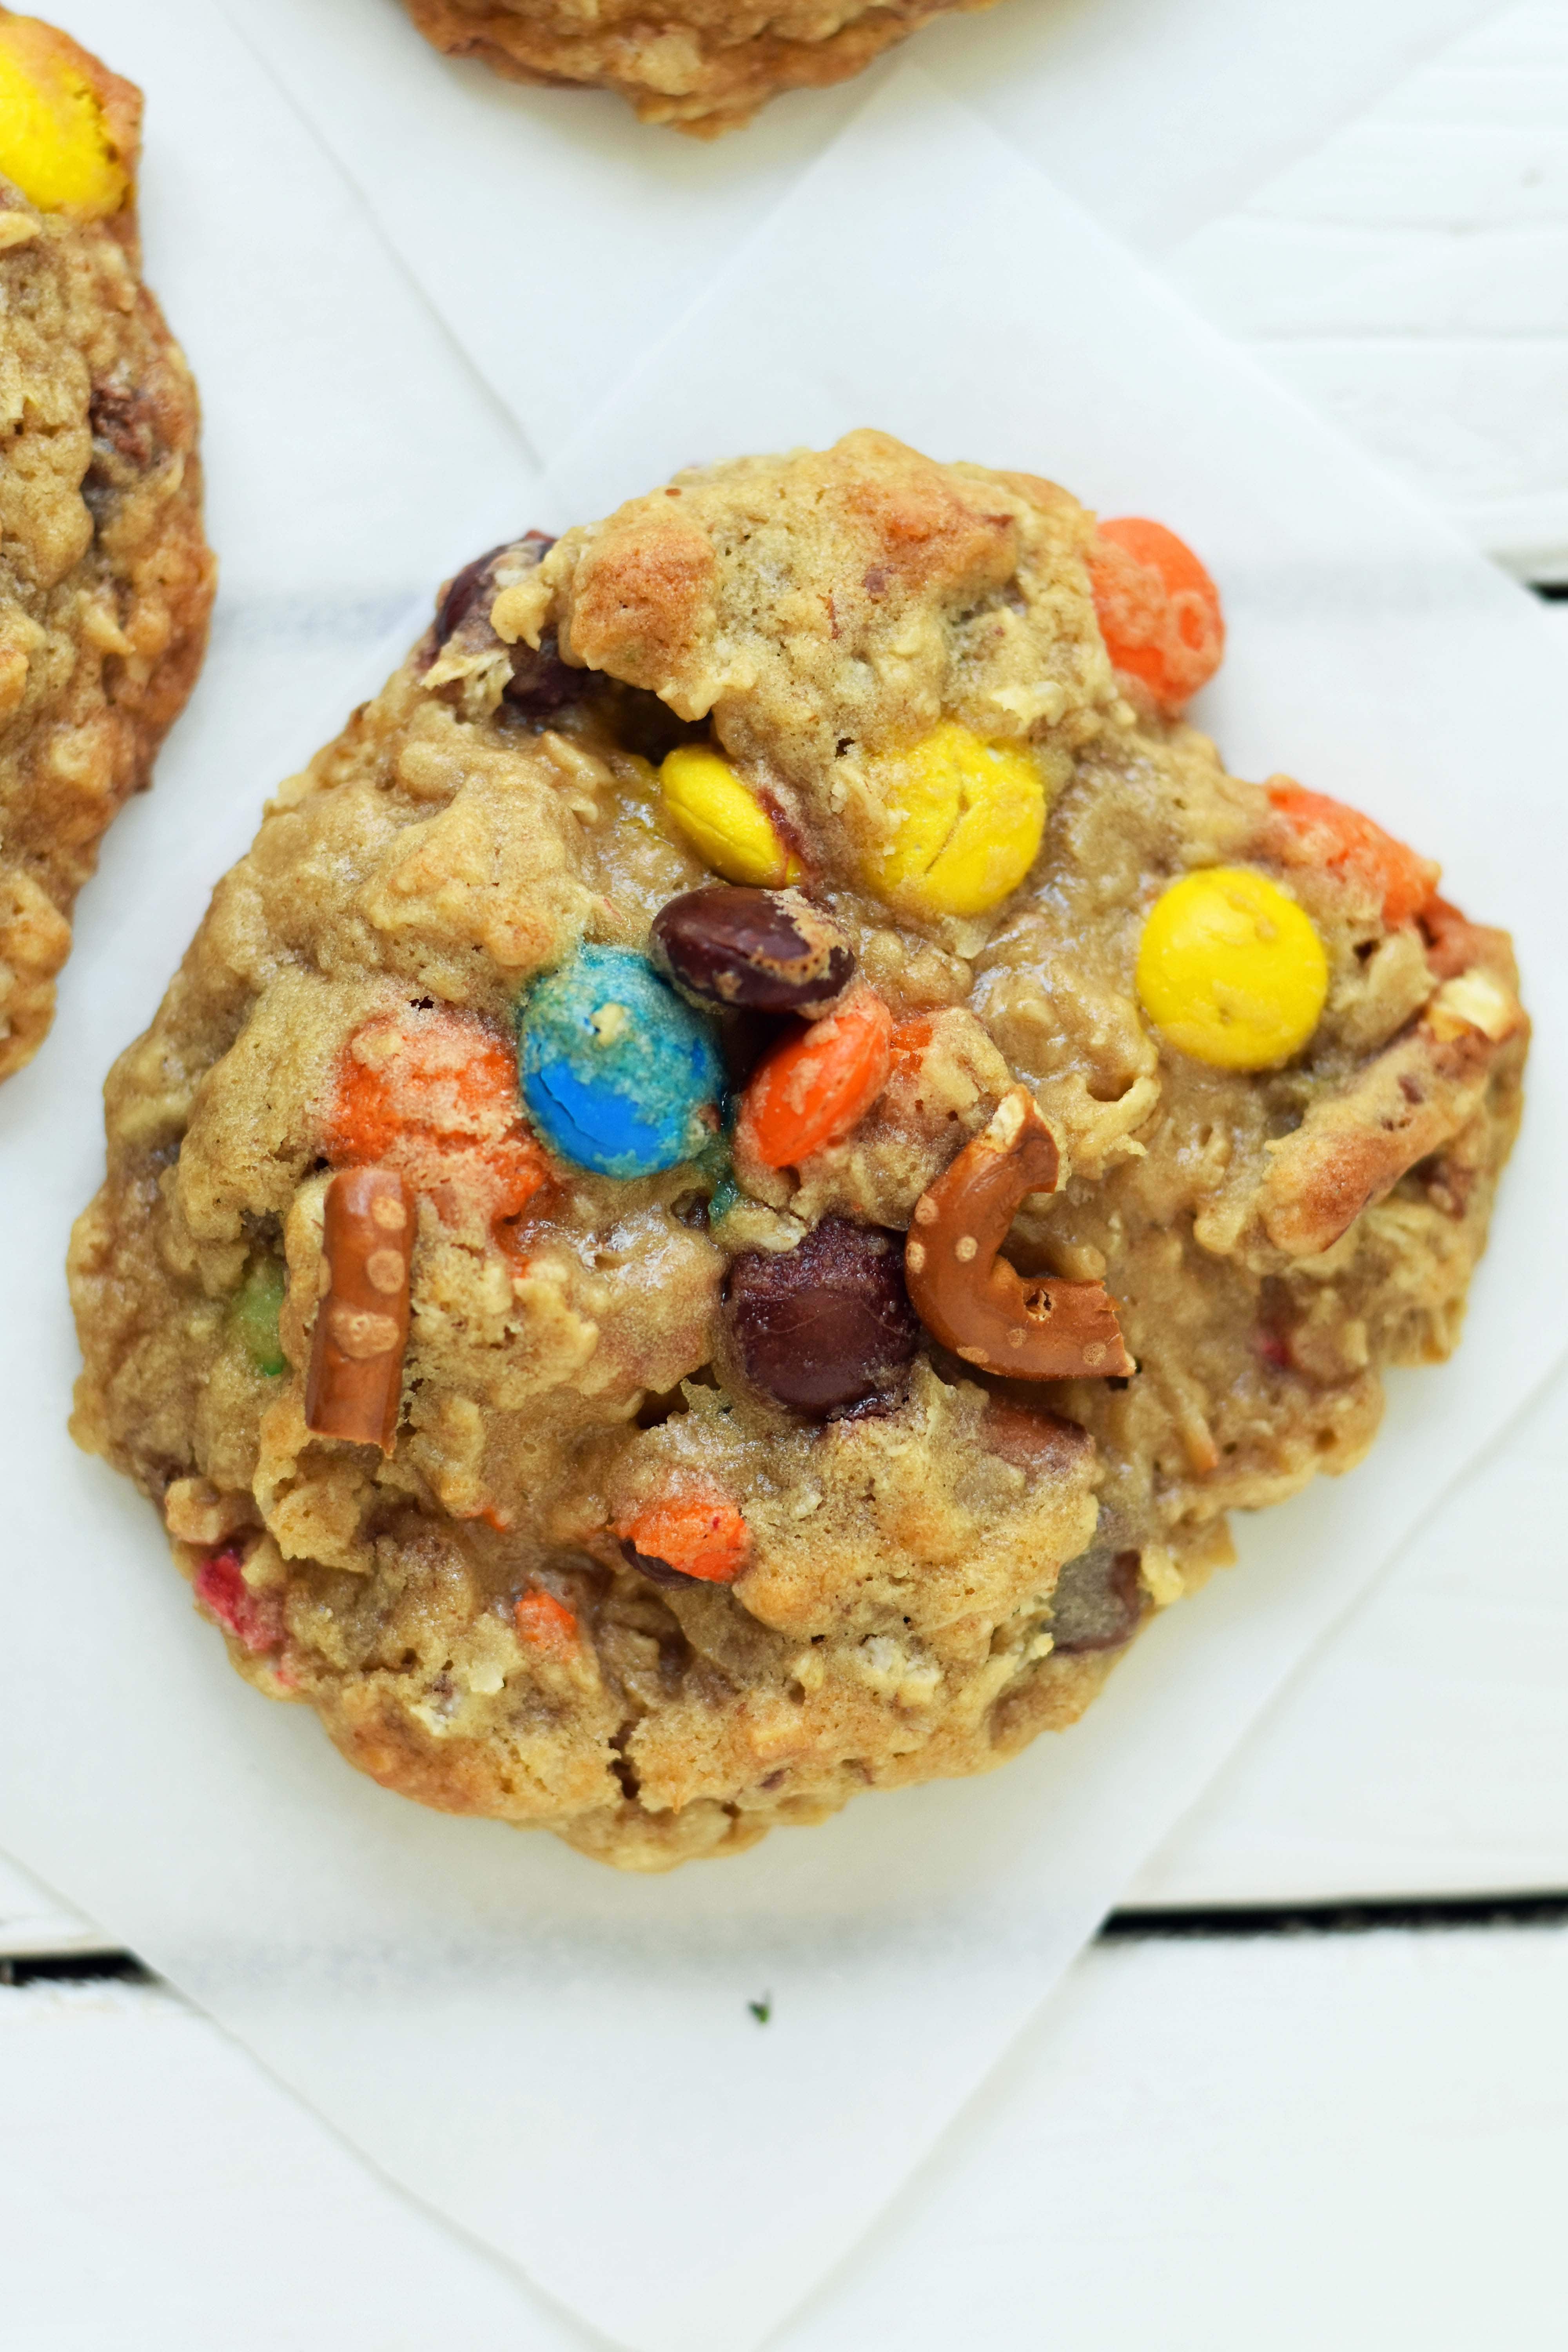 The Overachiever Oatmeal Pretzel M & M Cookie made with a sweet oatmeal cookie dough with oatmeal, shredded coconut, pretzels and M & M's. This Overachiever Cookie is the perfect balance of sweet and salty. www.modernhoney.com